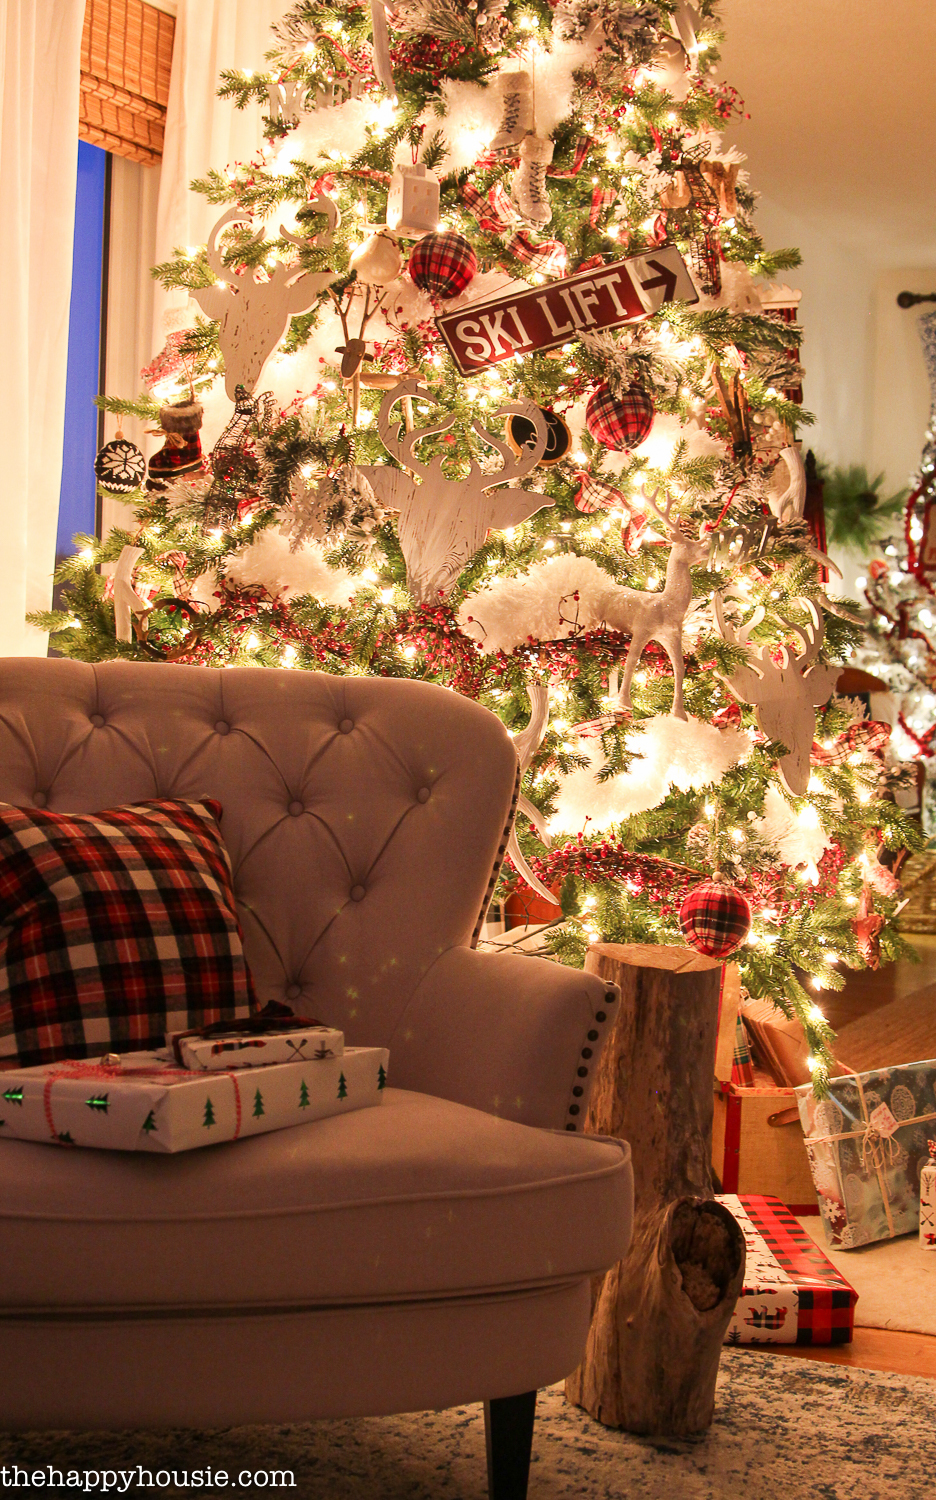 A shot of the tree behind the couch.